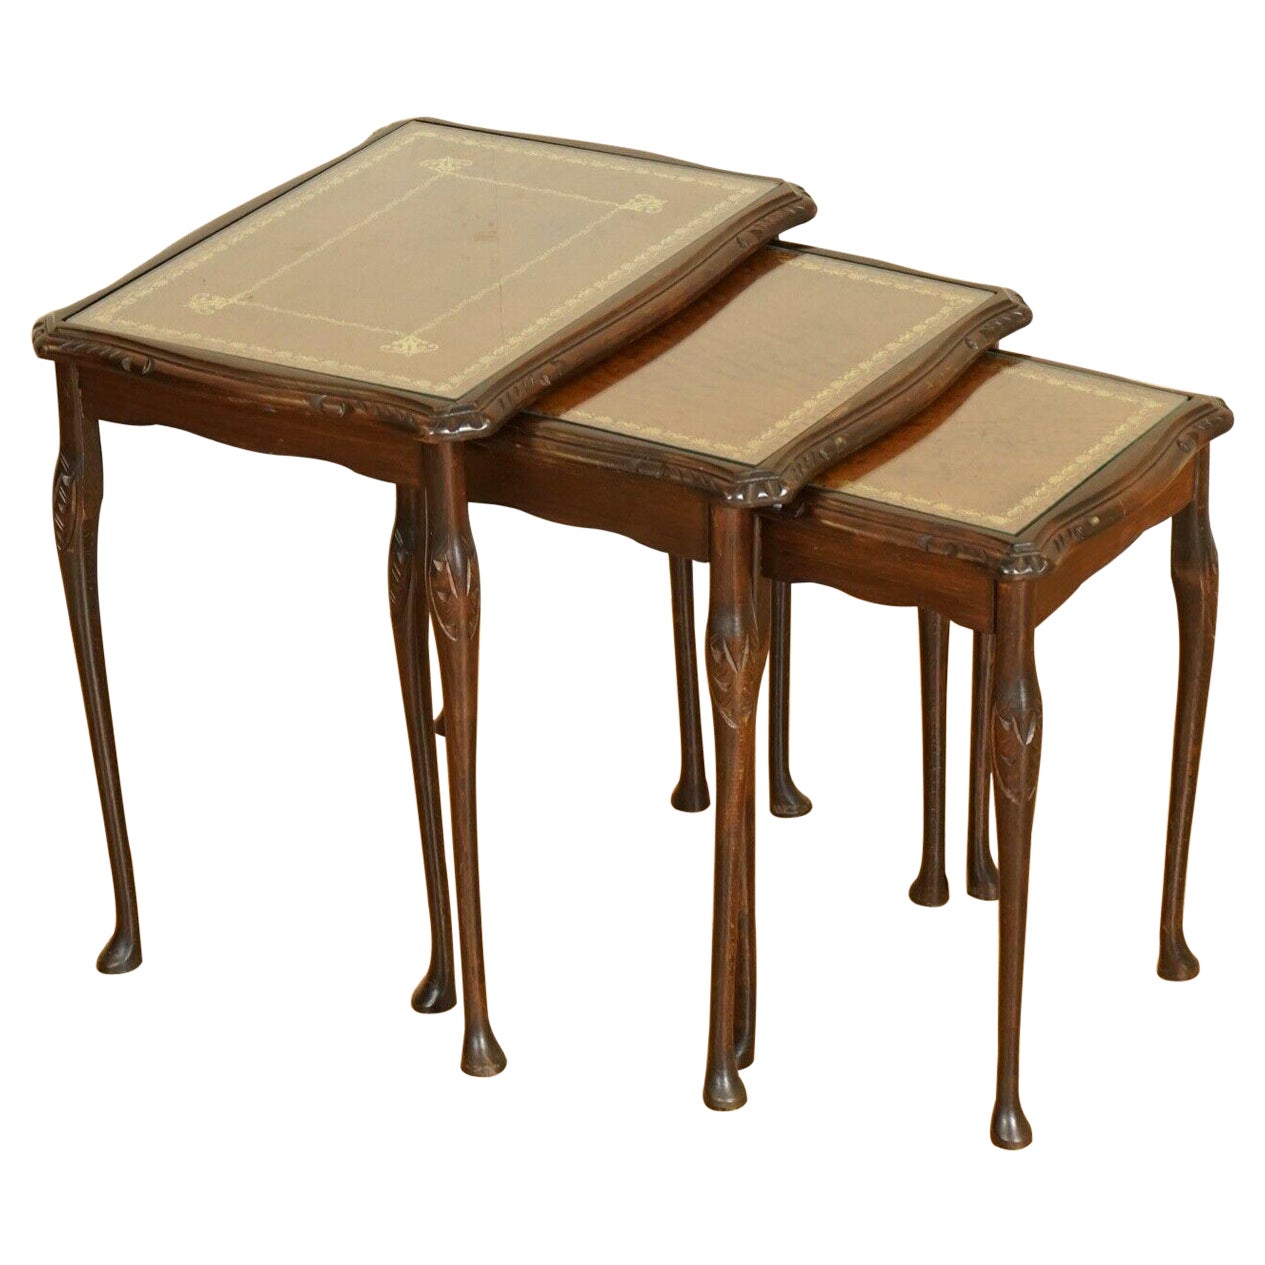 Hardwood Nest of Tables Queen Anne Style Legs with Brown Embossed Leather Top For Sale